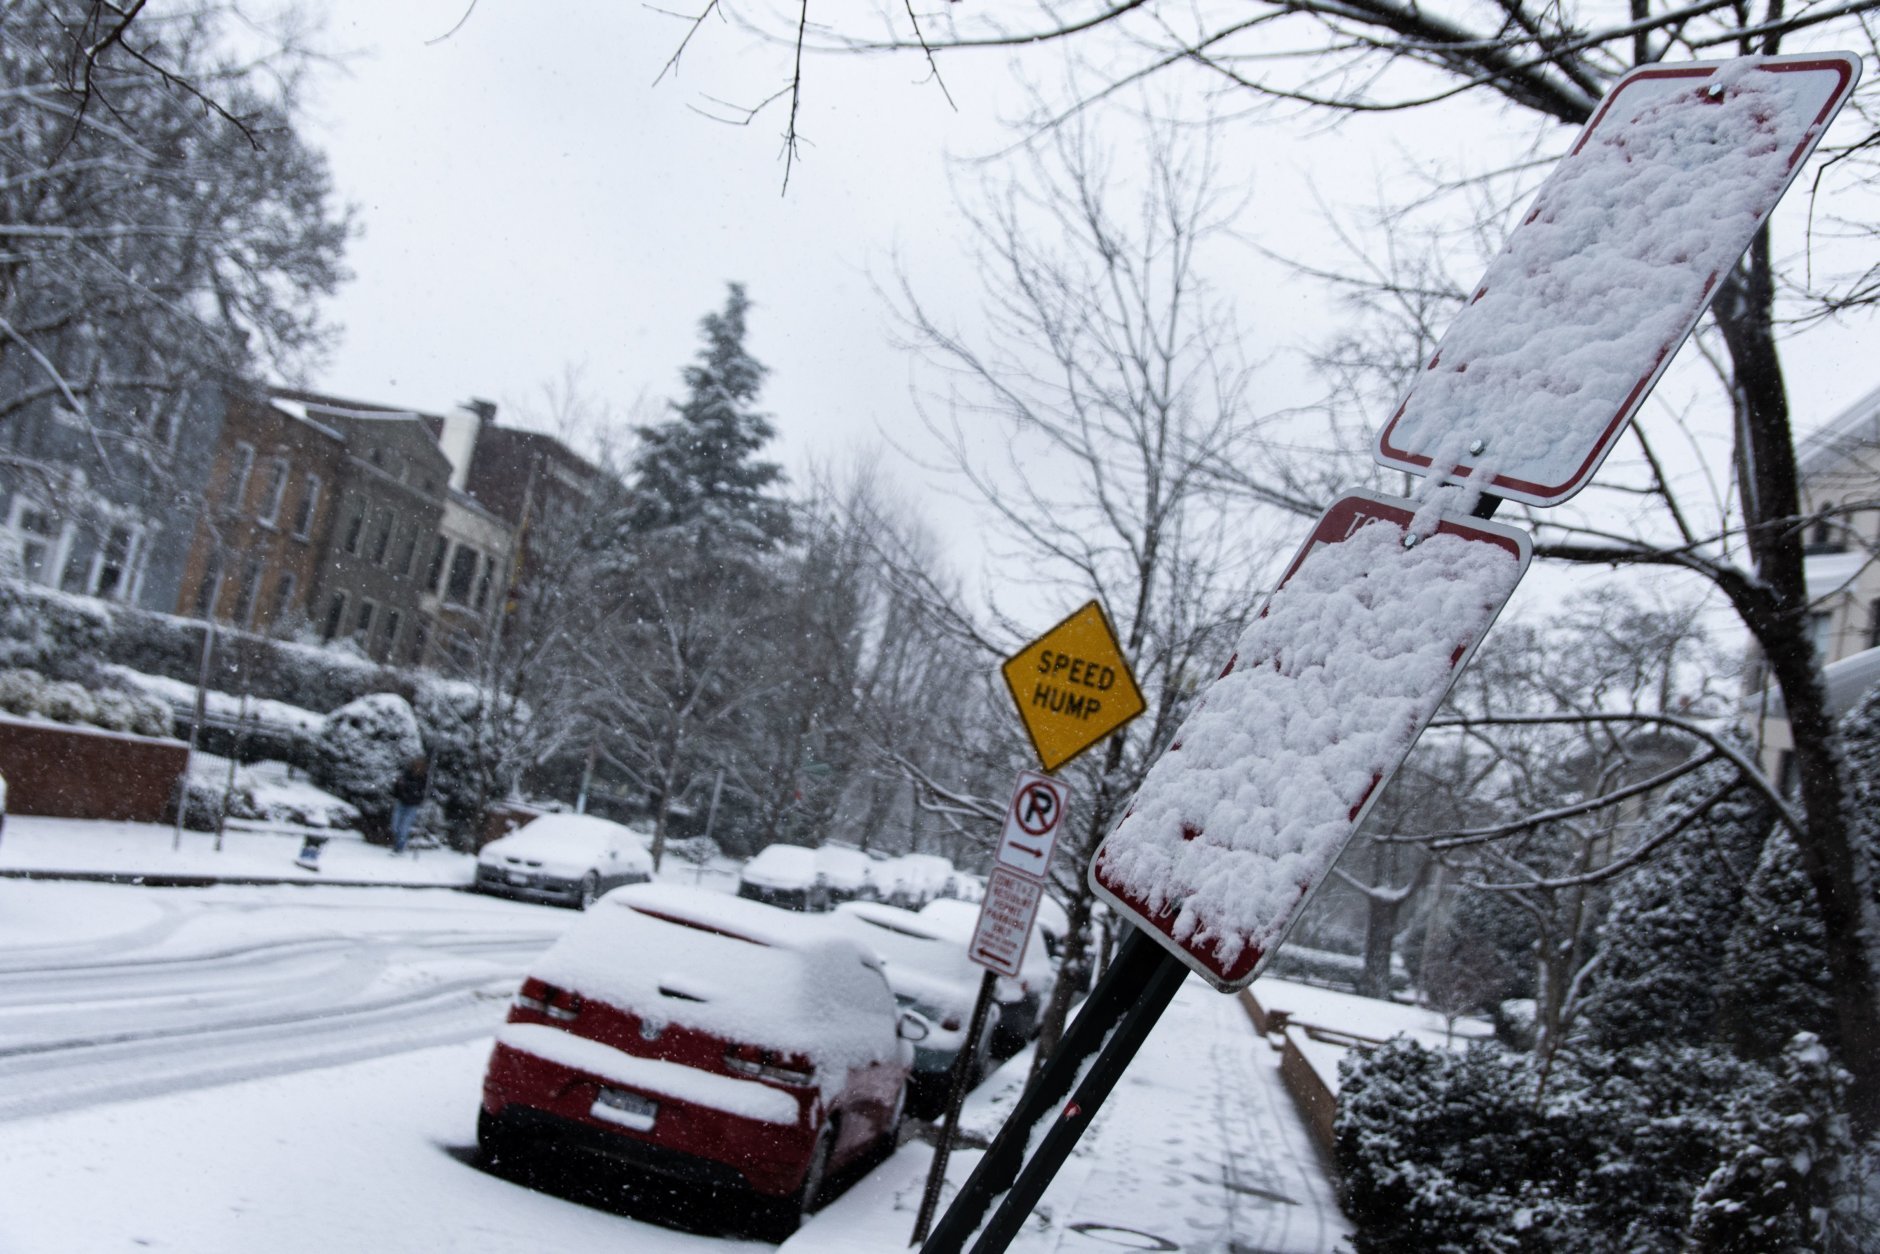 In northwest D.C.’s Kalorama Heights neighborhood, snow was sticking to roadside signs and vehicles by mid-morning Wednesday. (WTOP/Alejandro Alvarez)